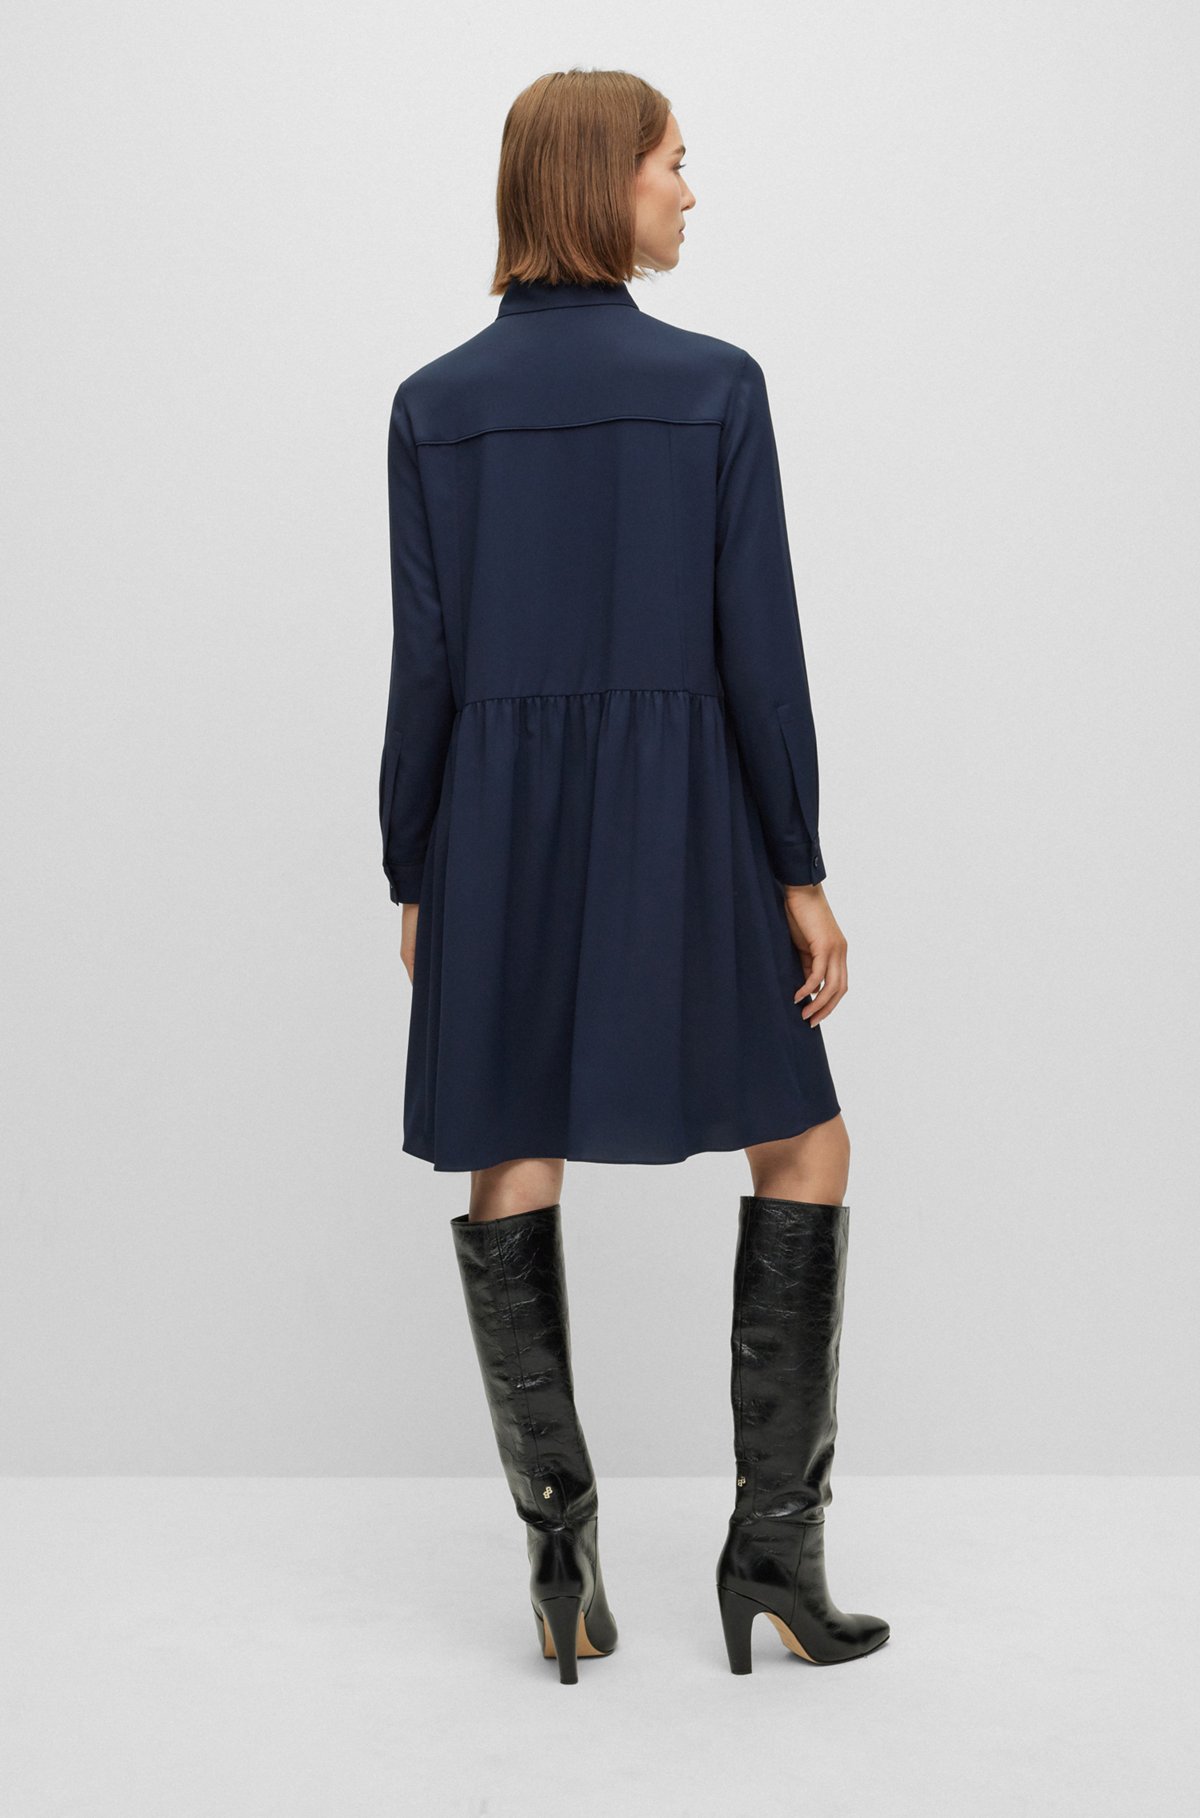 Relaxed-fit dress in crinkle crepe, Dark Blue